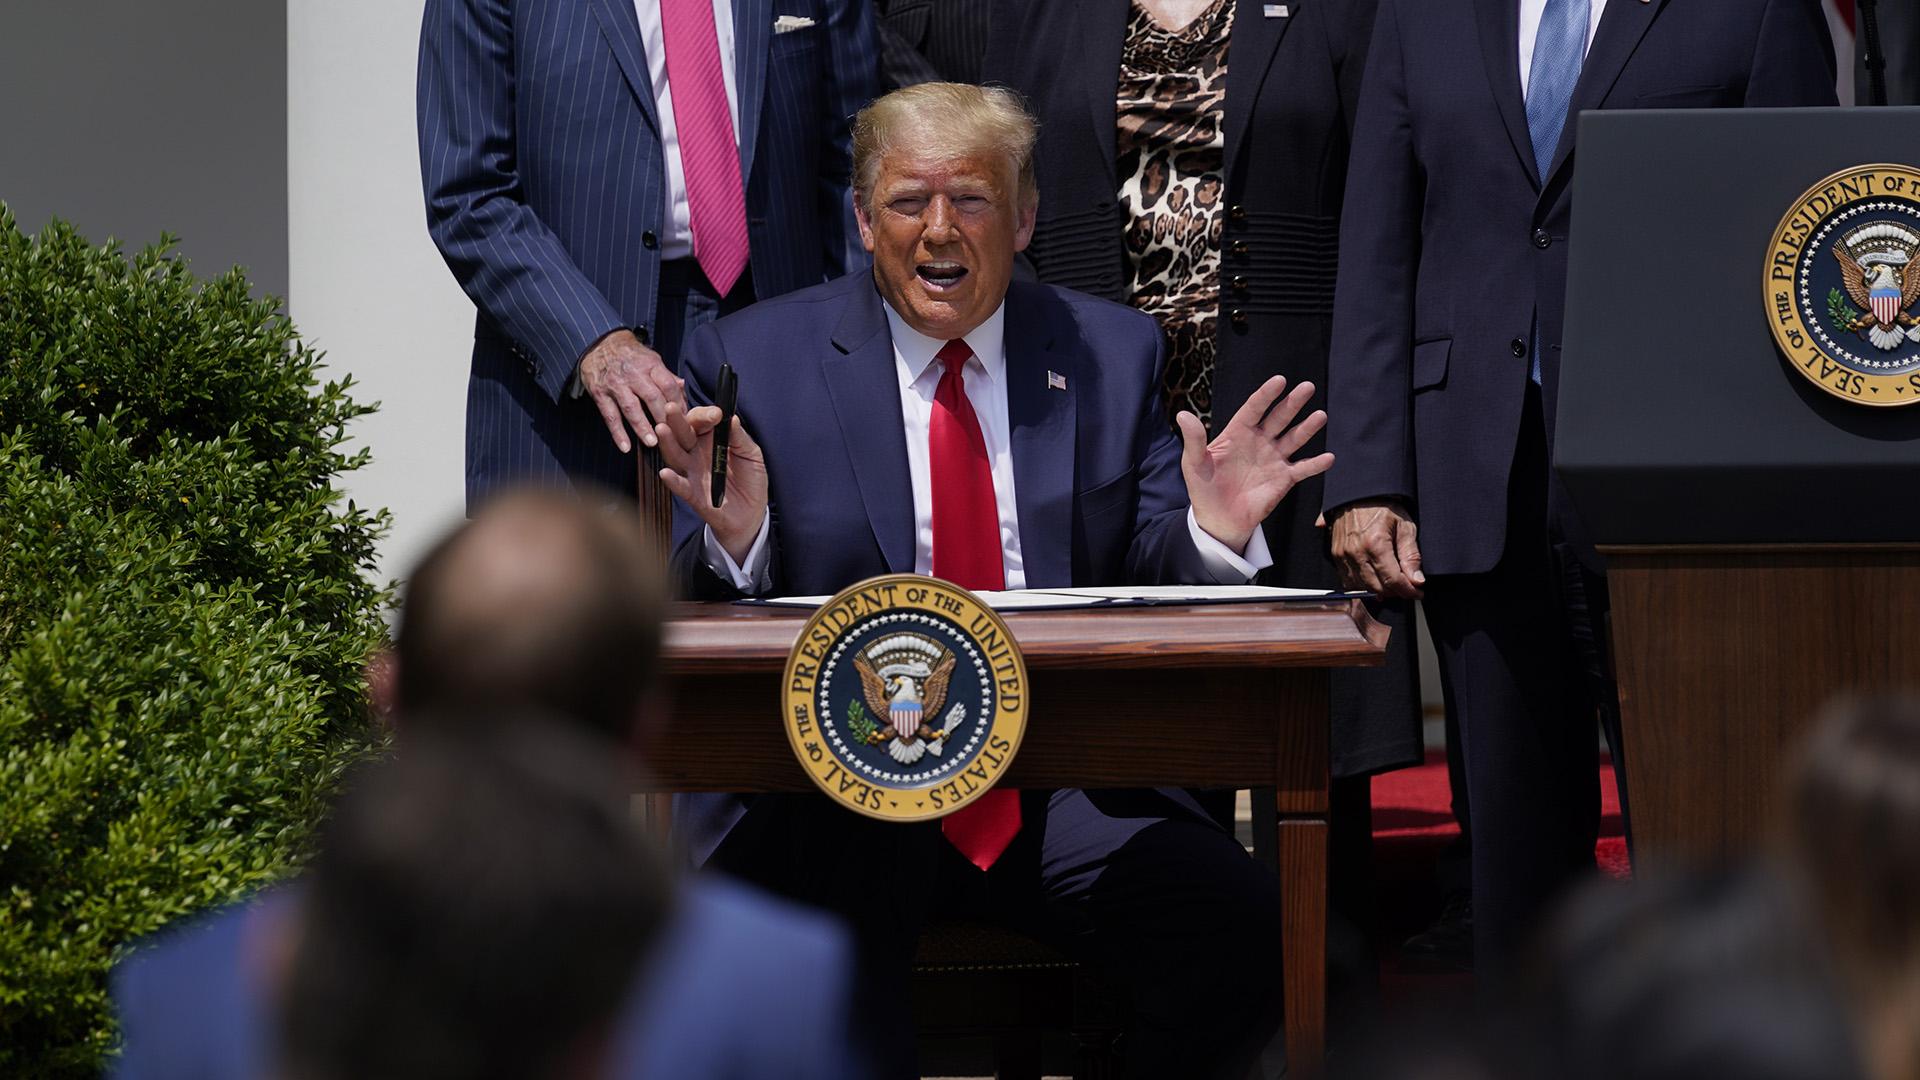 President Donald Trump speaks as he signs the Paycheck Protection Program Flexibility Act during a news conference in the Rose Garden of the White House, Friday, June 5, 2020, in Washington. (AP Photo / Evan Vucci)